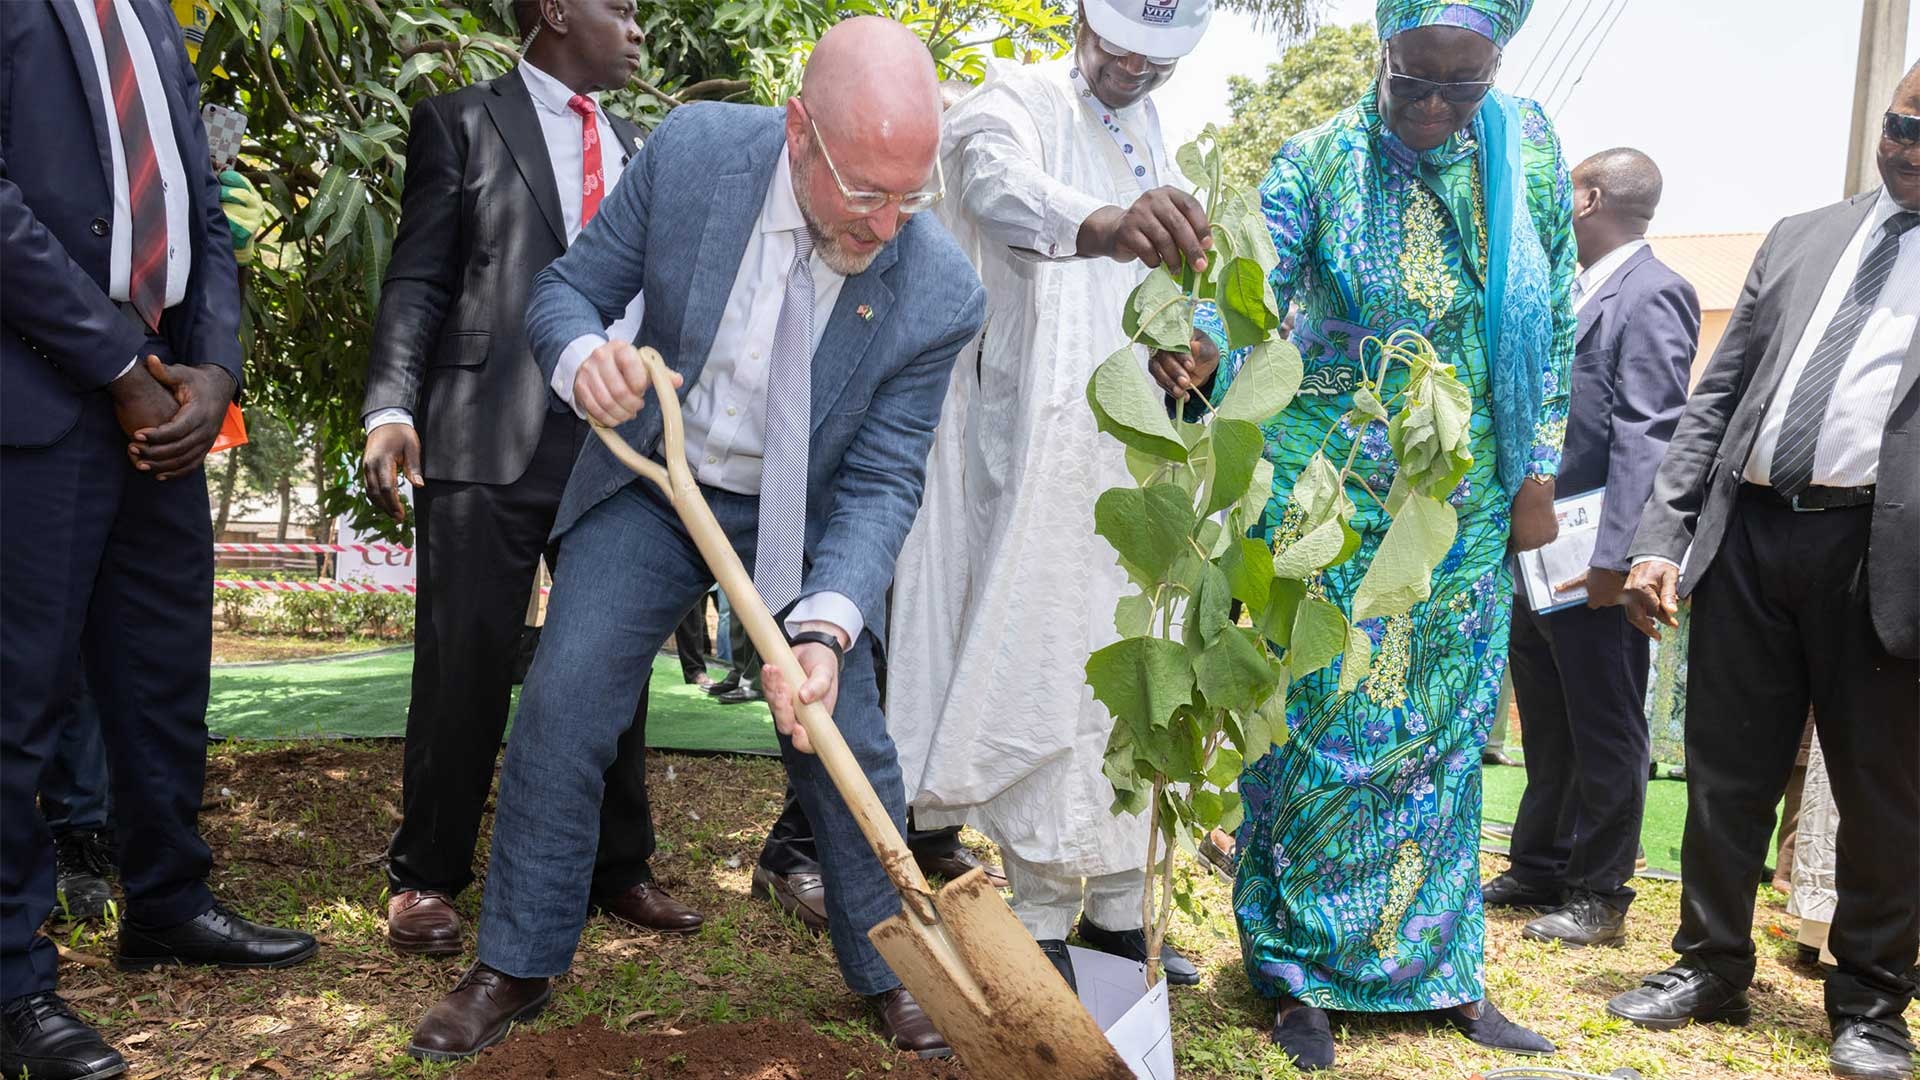 Strengthening Biosecurity in Nigeria: A Groundbreaking Ceremony with the Defense Threat Reduction Agency and Nigeria’s National Veterinary Research Institute